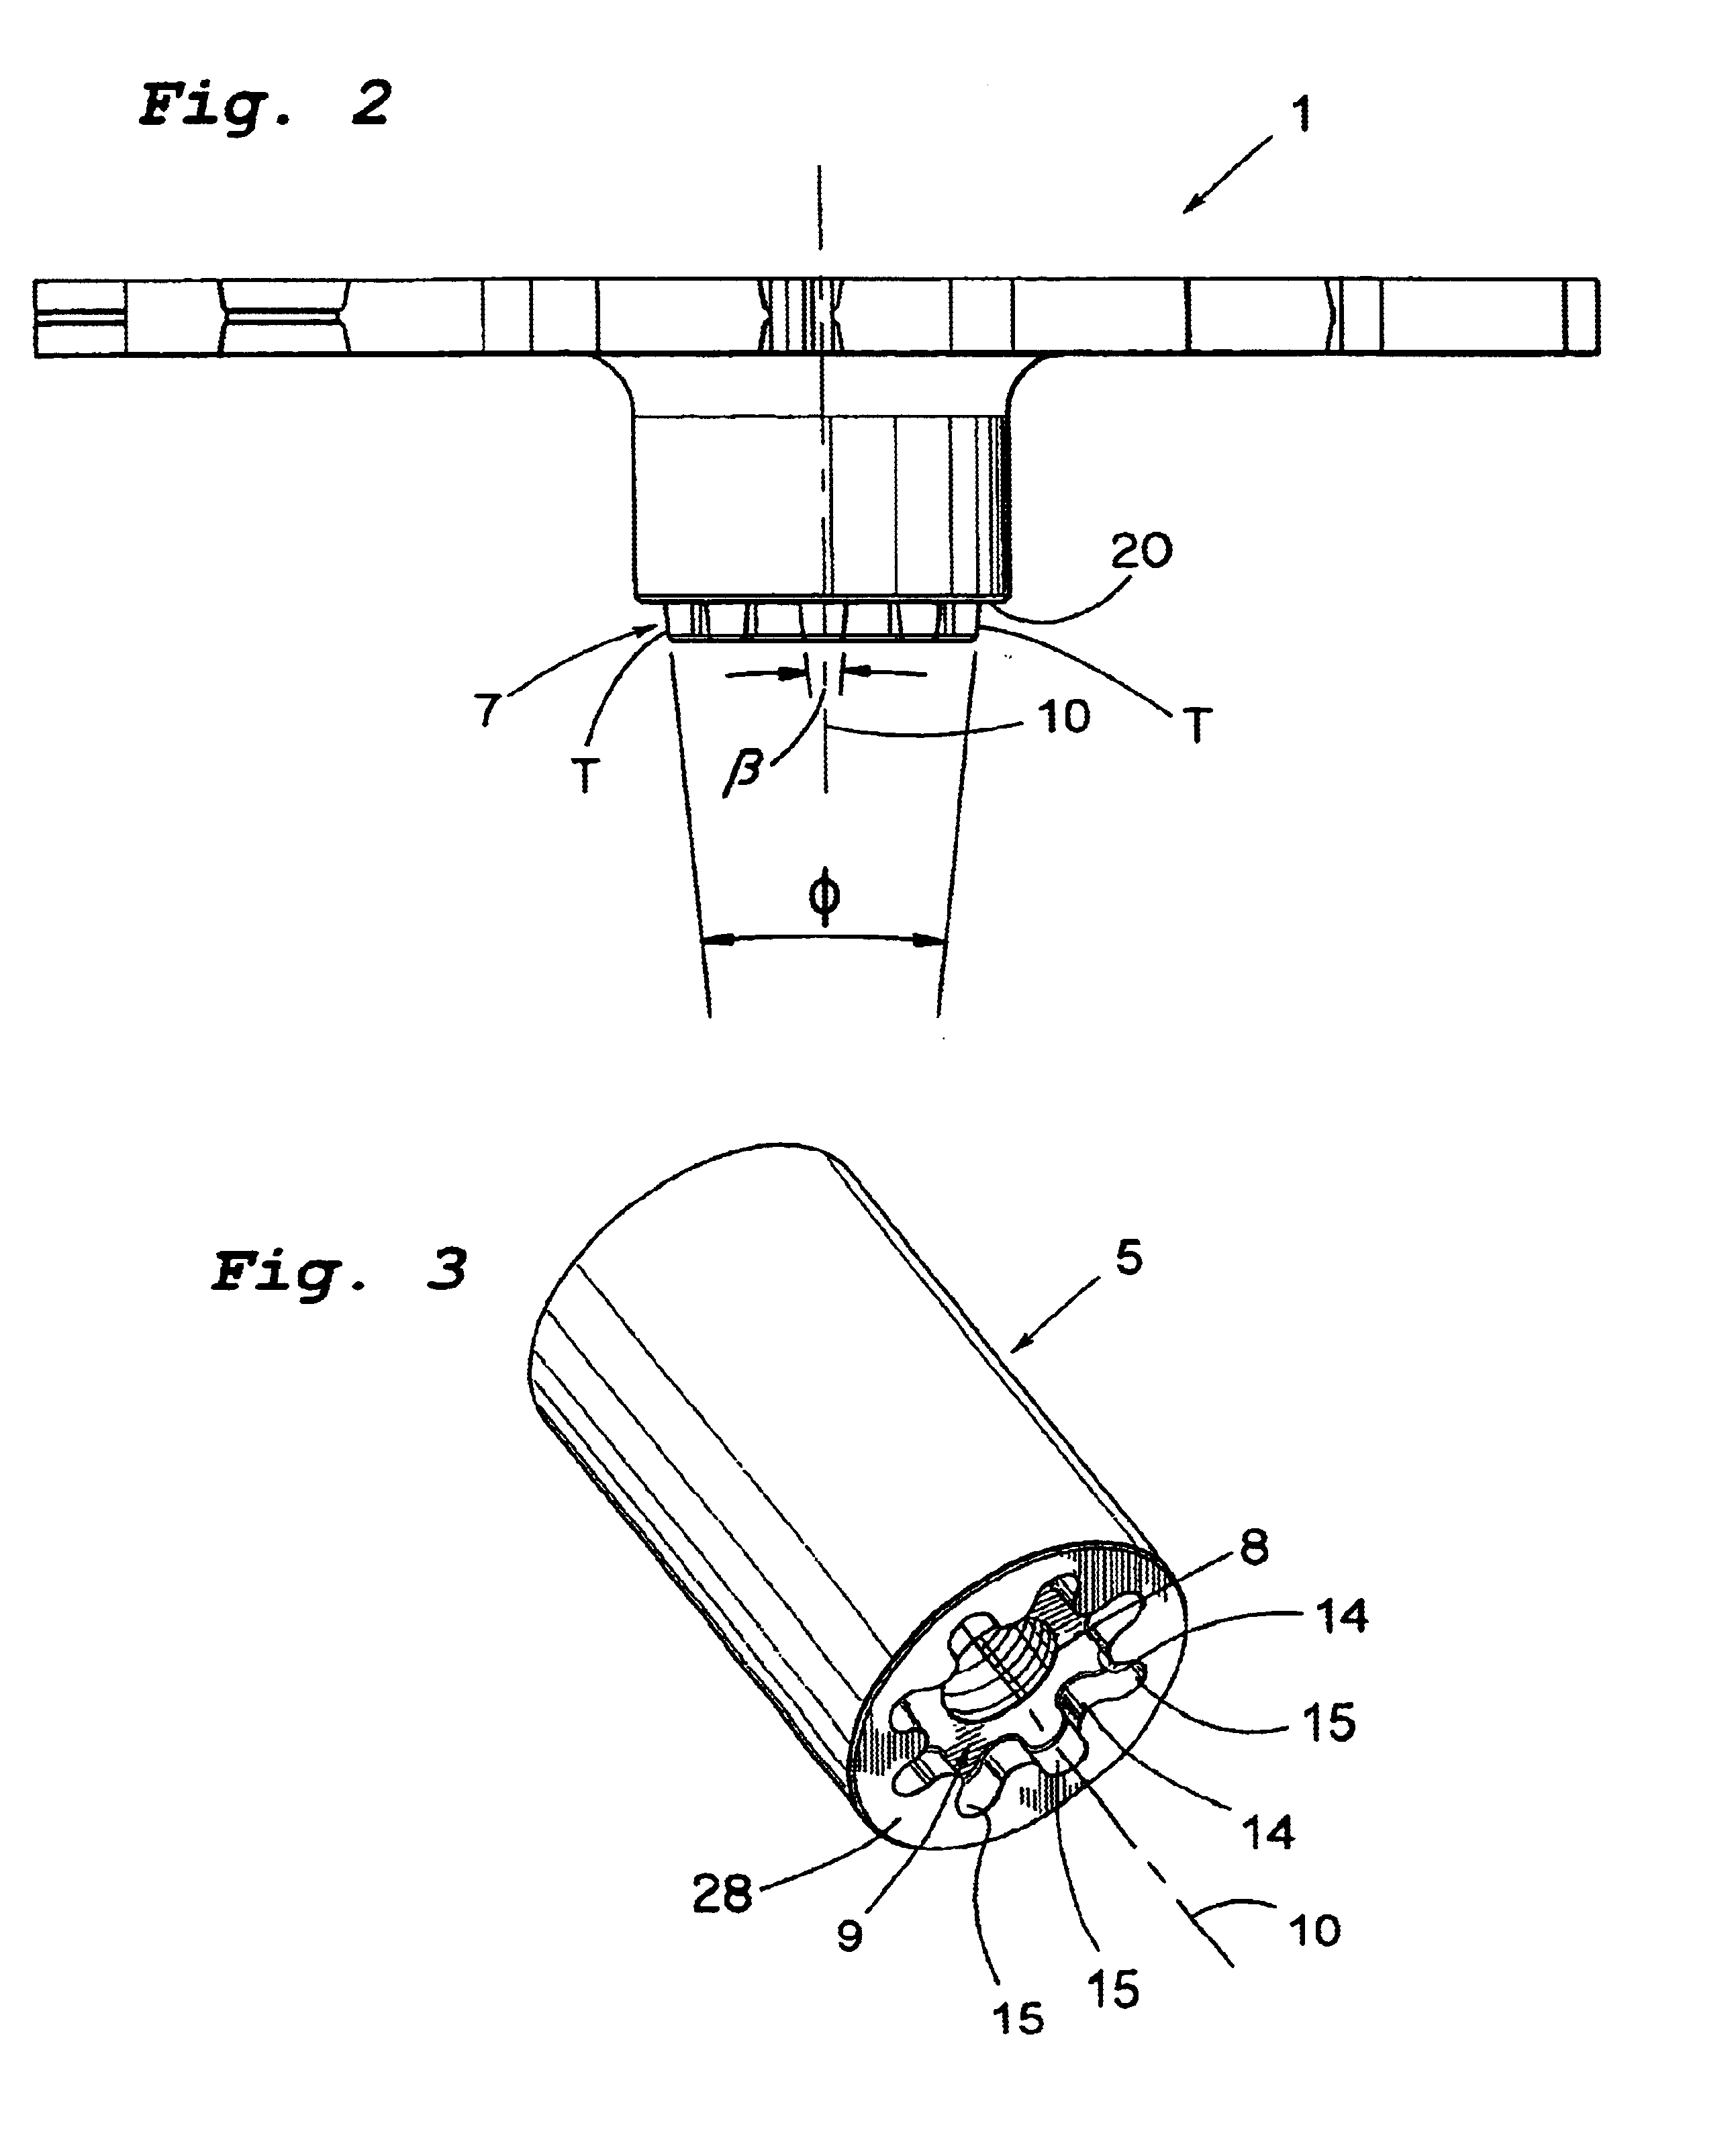 Toothed tool coupling for rotating a rotary tool